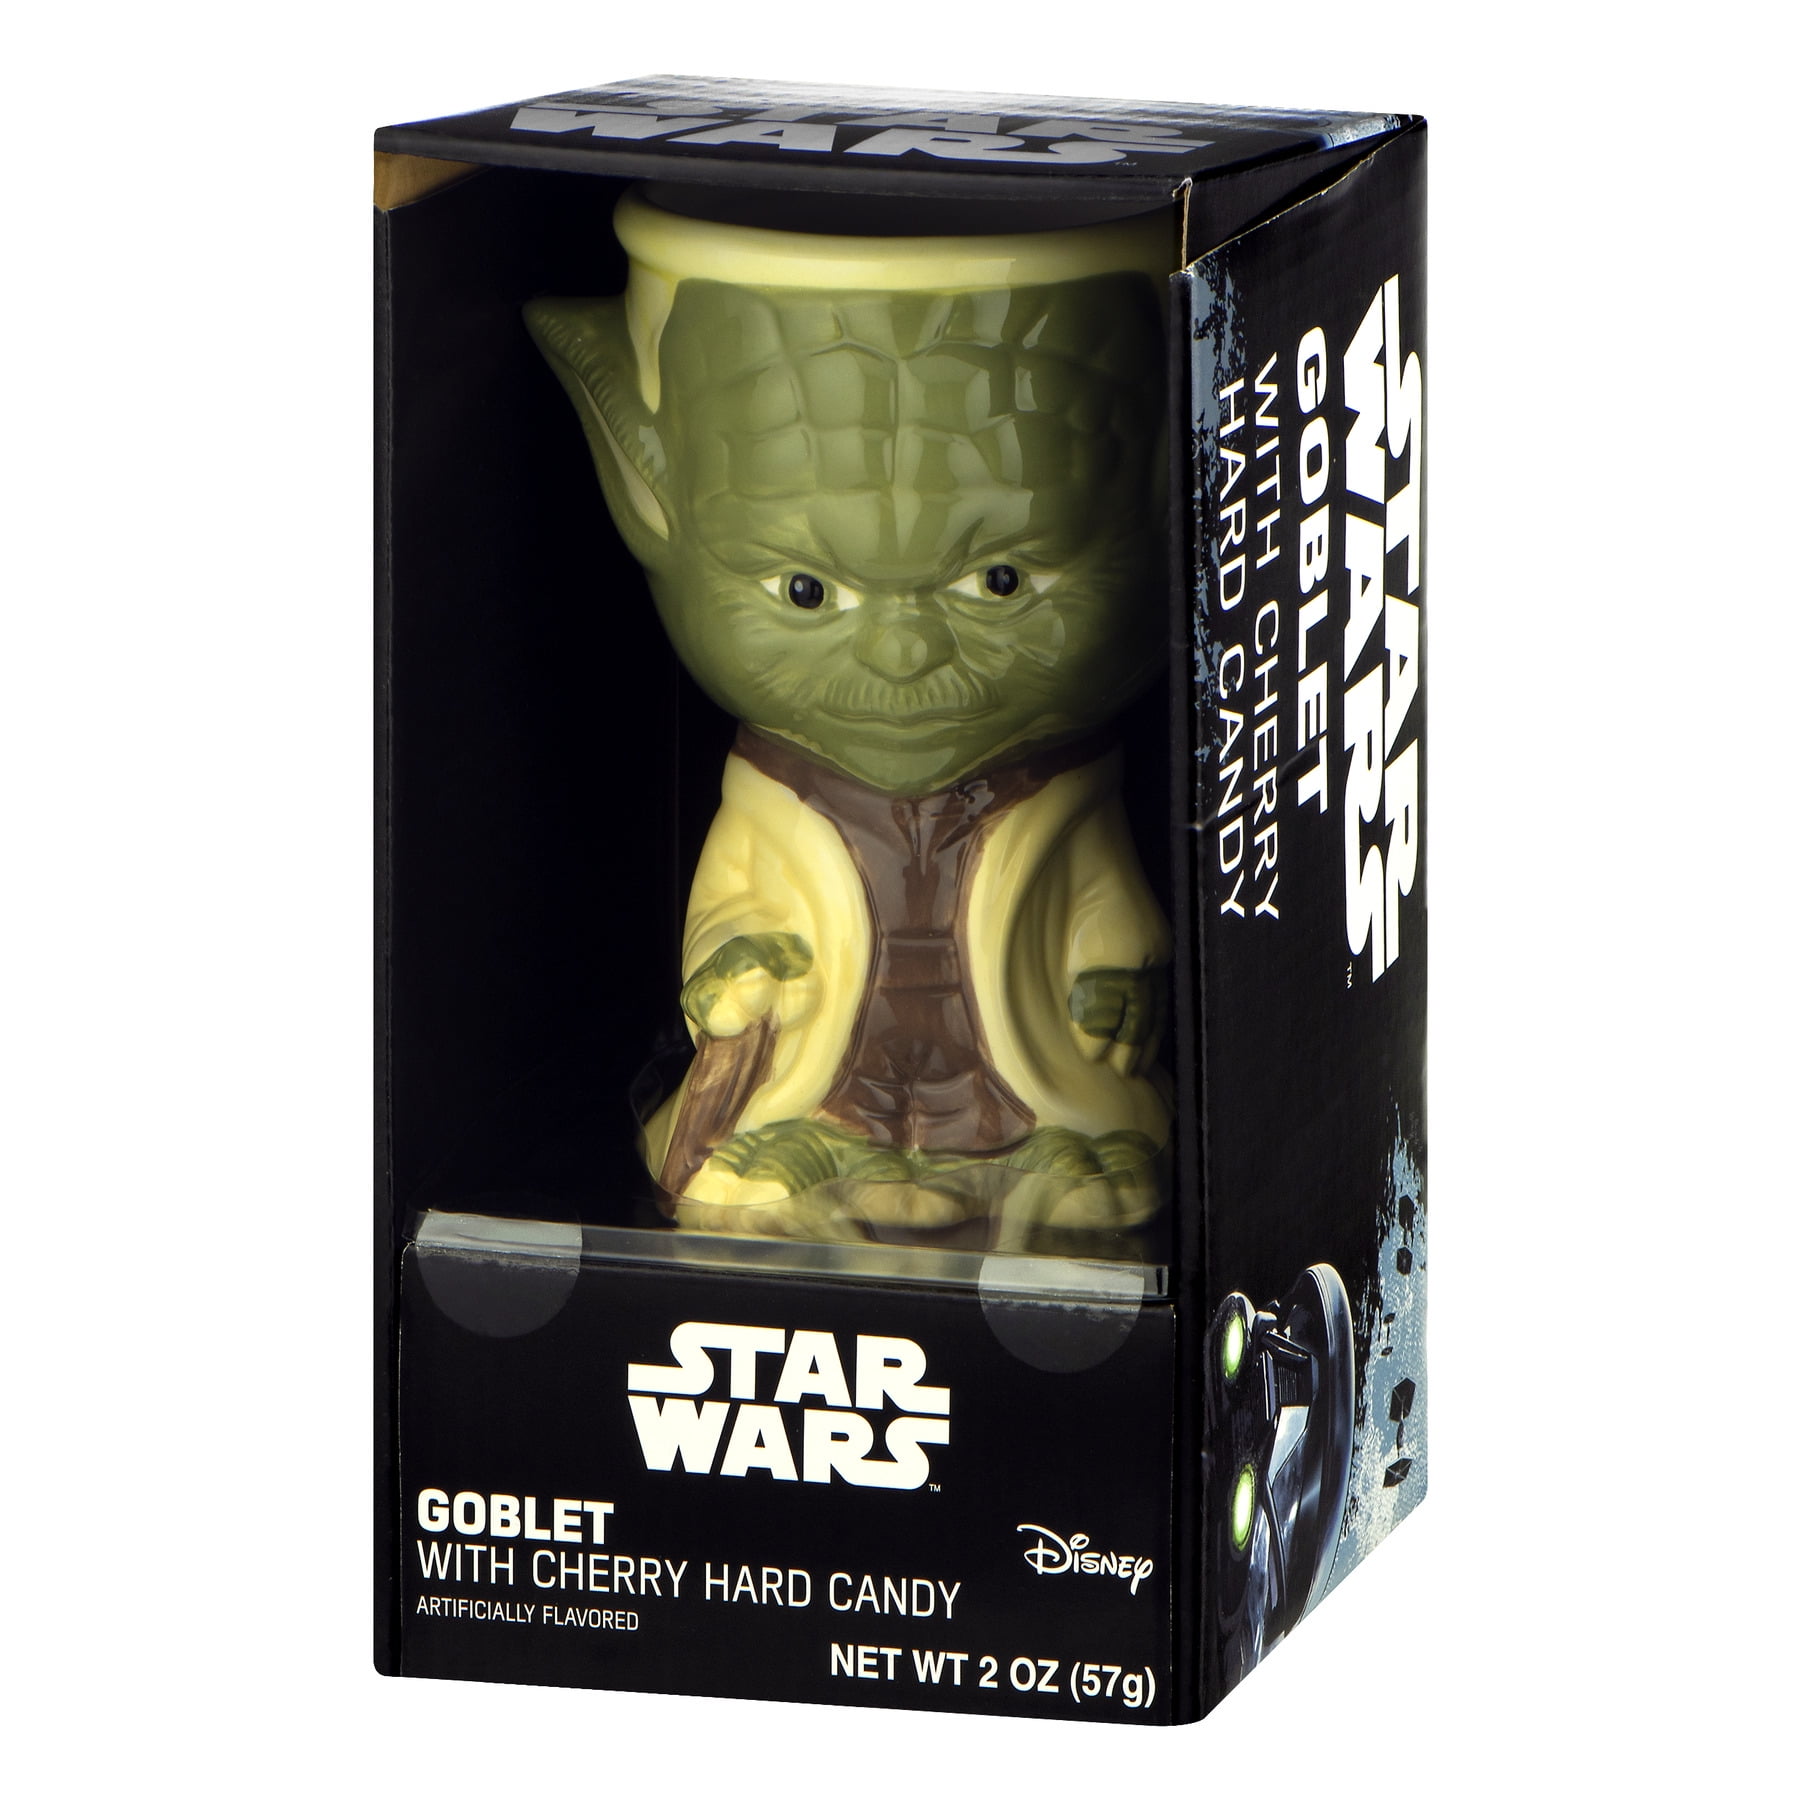 Star Wars Yoda Ceramic Goblet with Cherry Hard Candy — MPreview Toys and  Collectibles